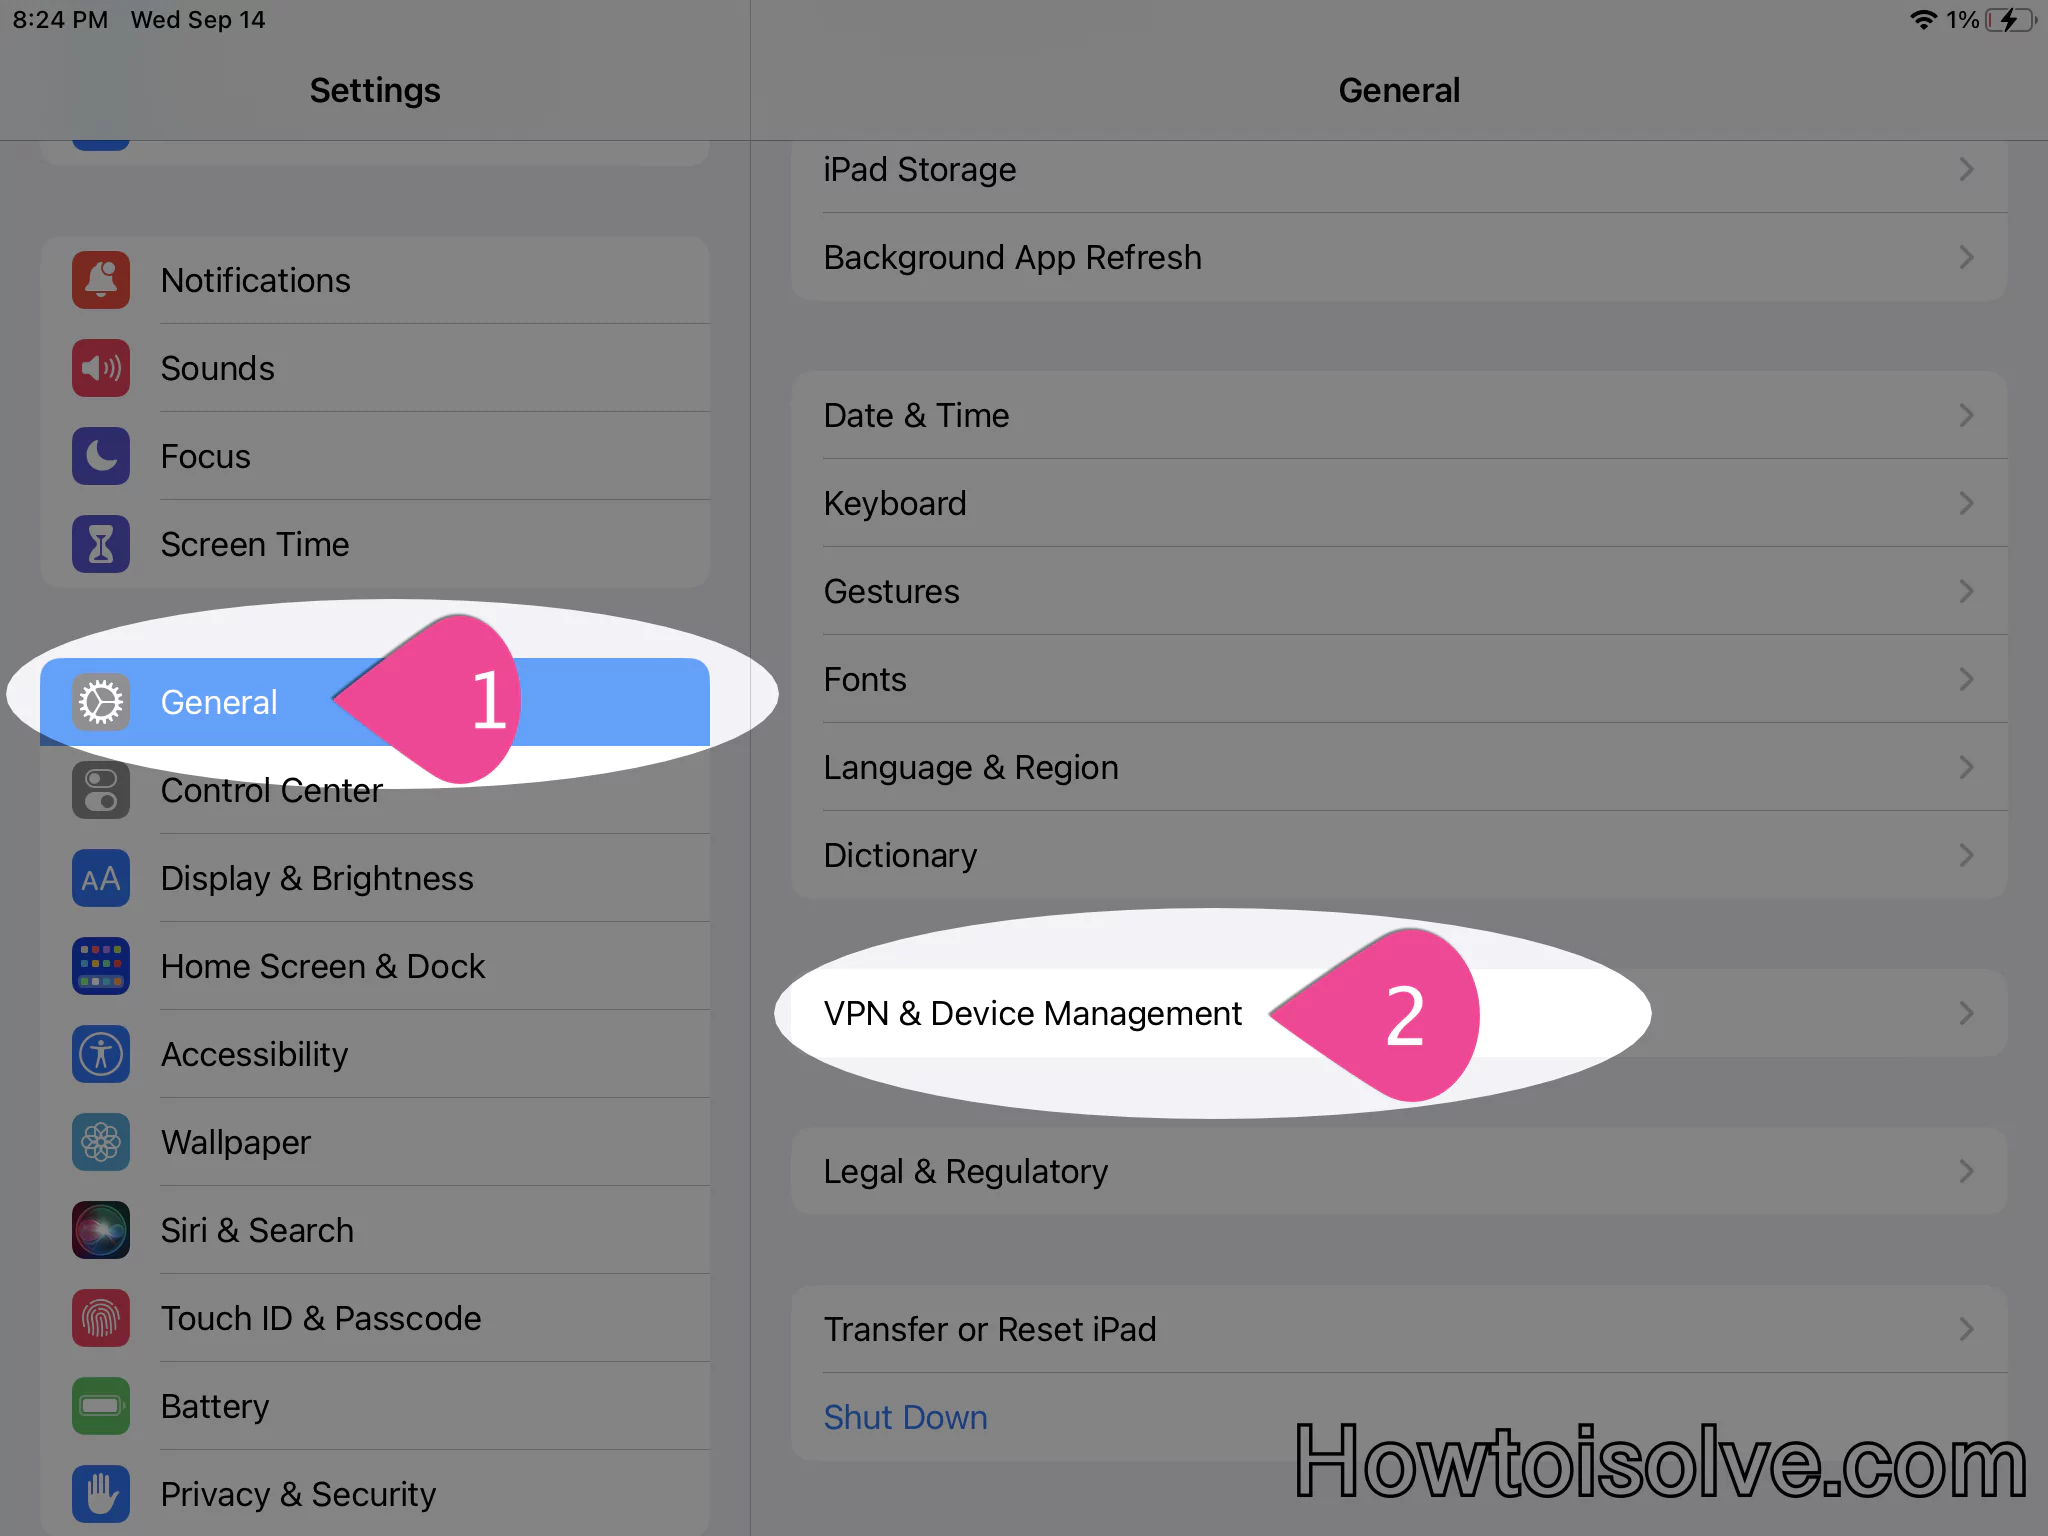 go-to-general-and-choose-vpn-and-device-management-on-ipad-settings-app